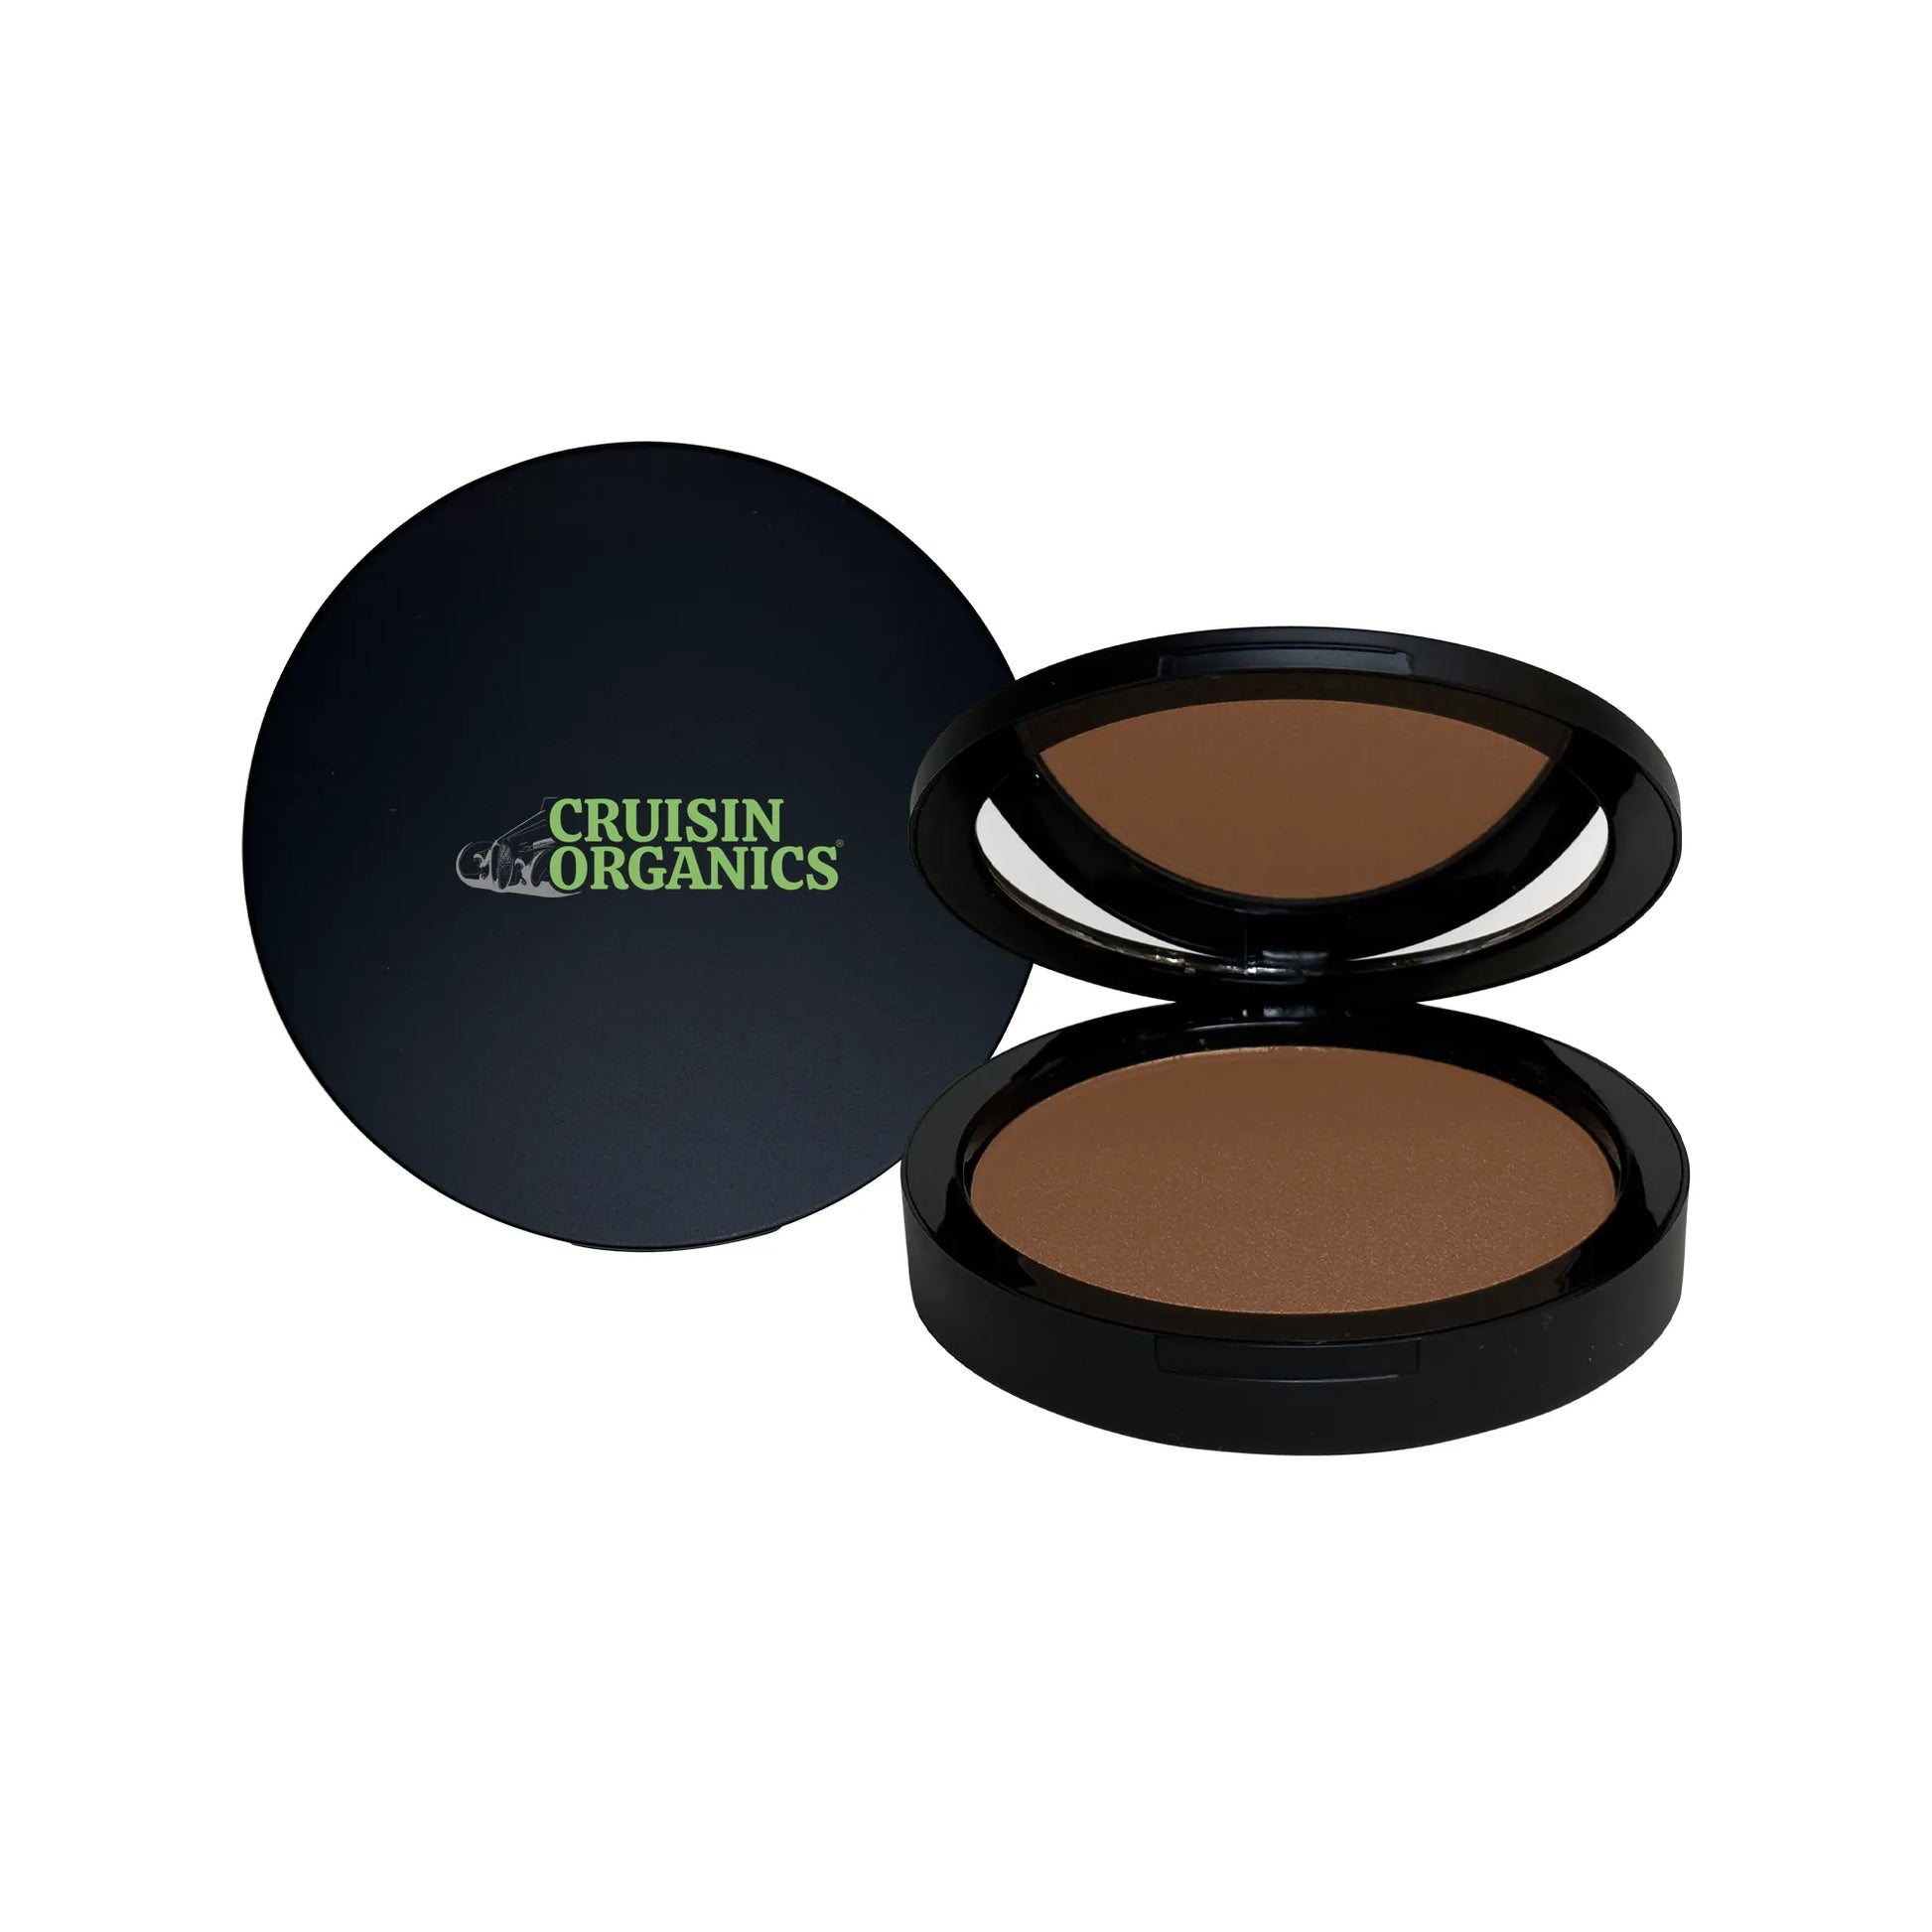 A natural tan and sculpt all year round, our Cruisin Organics mocha bronzer has the perfect balance of red and brown tones to enhance your makeup look. Dust our mocha bronzer across your cheeks and forehead for a flattering, complete look with a silky, smooth texture. You can pair your favorite blush with our bronzer for a multidimensional look. Mattifying to reduce shine, our bronzer is designed to match every skin tone.